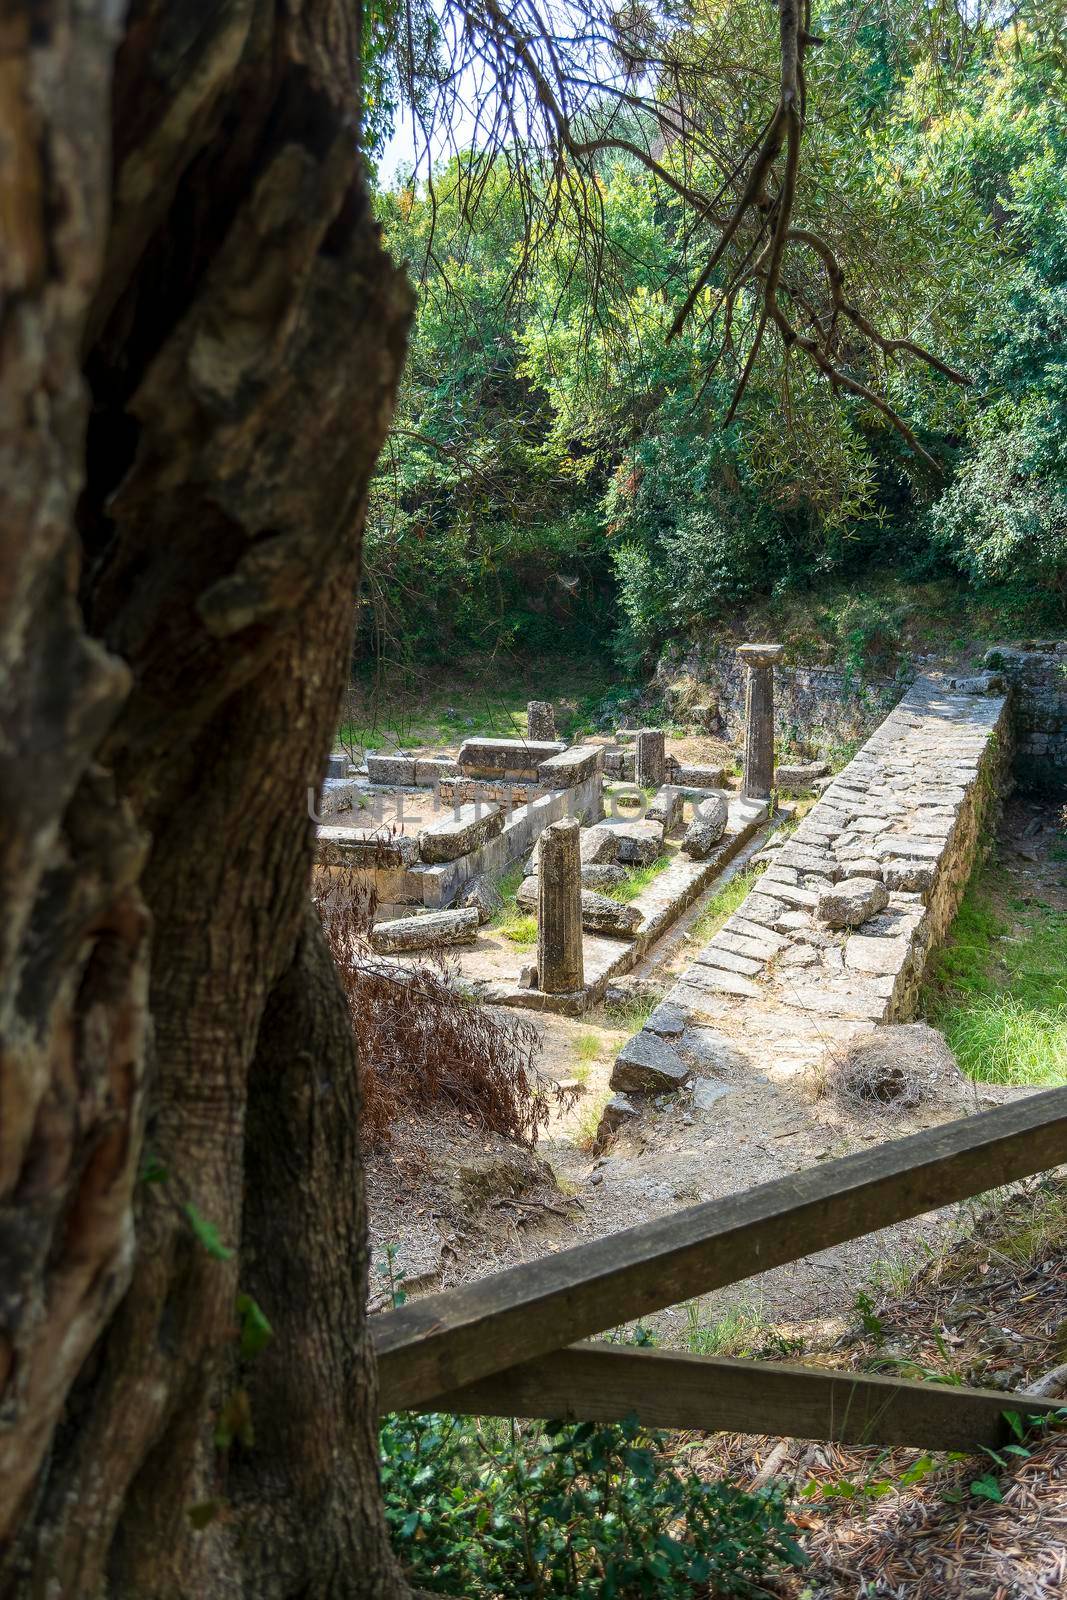 Remains of a Doric temple at Mon Repos park, Corfu Town, Greece.